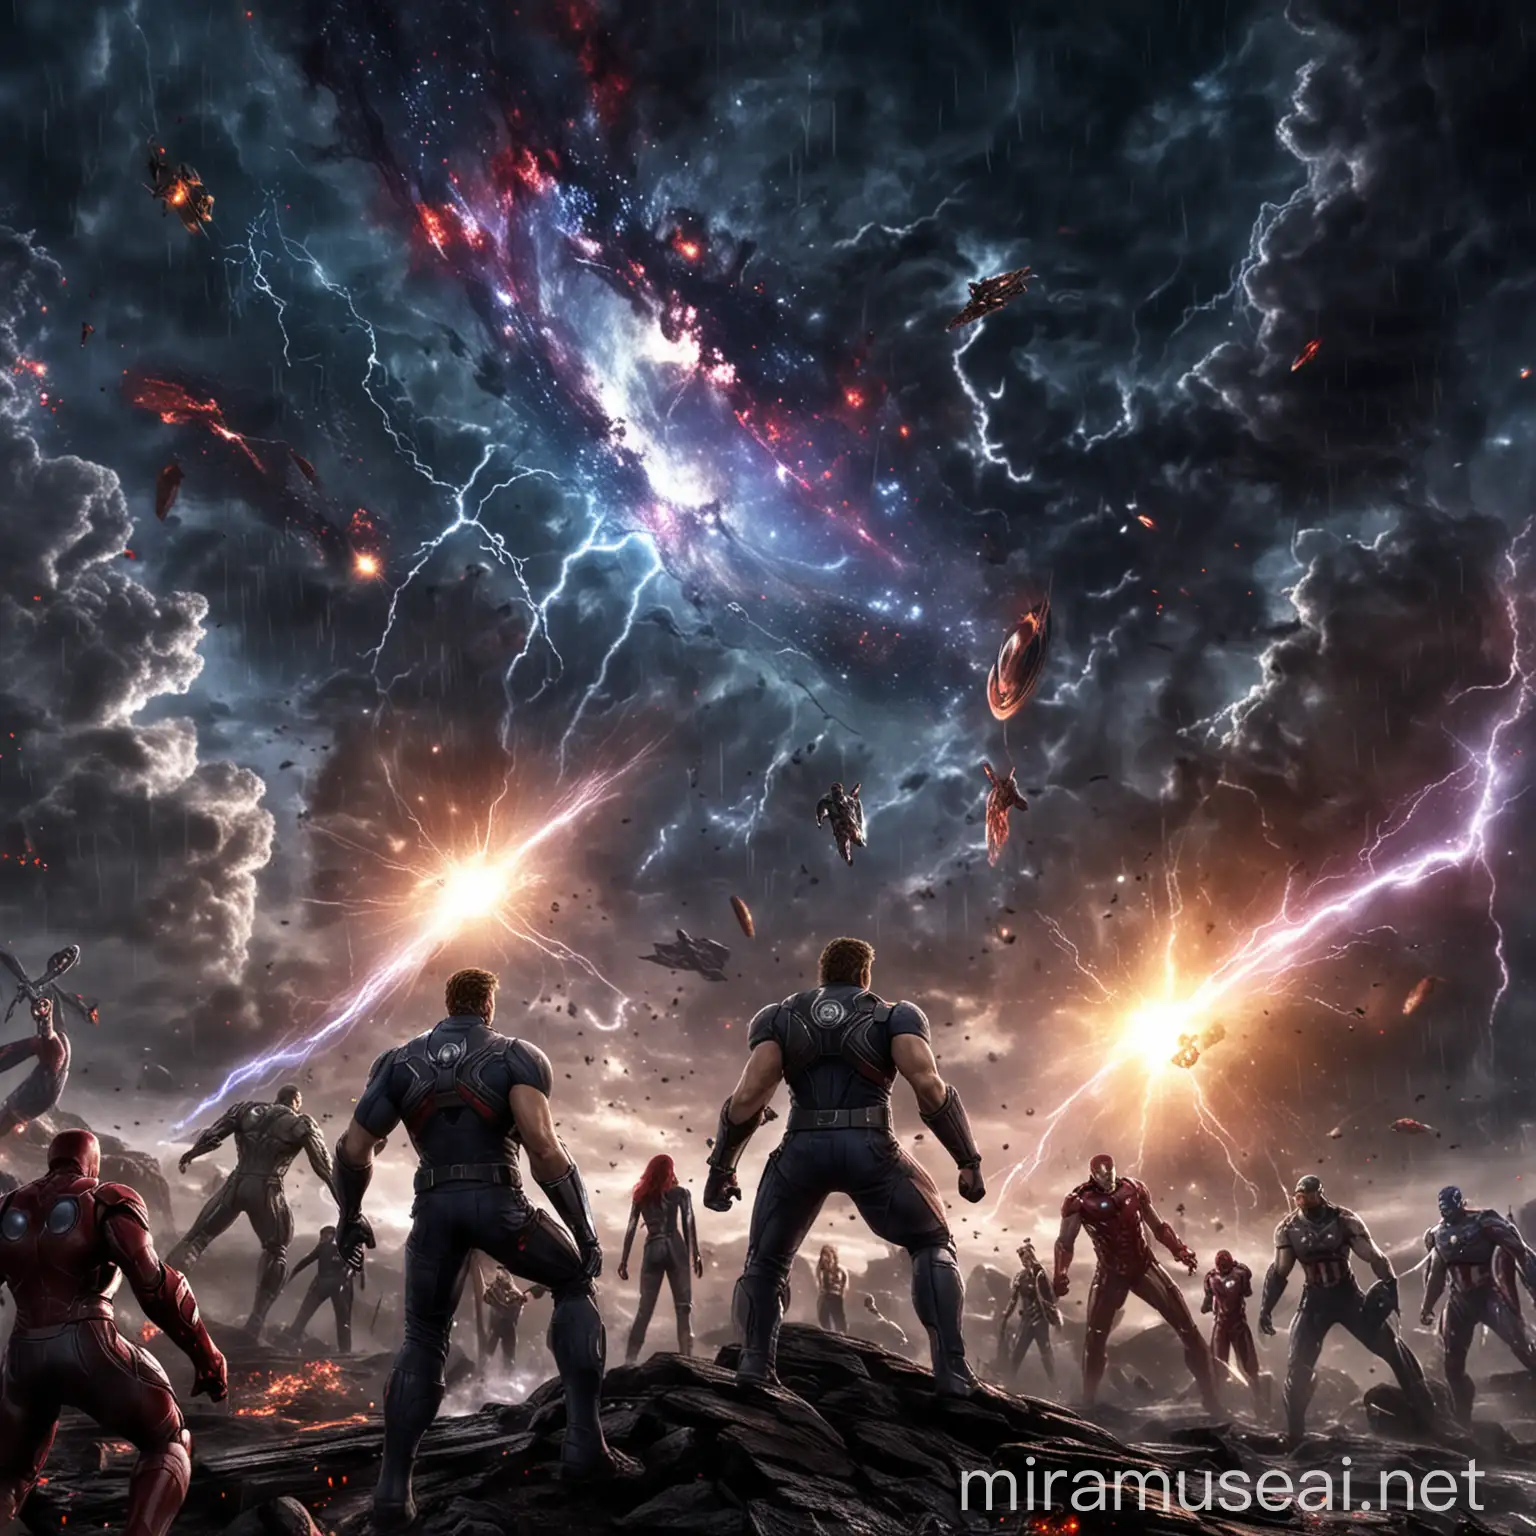 background galaxy, storm, The Avengers